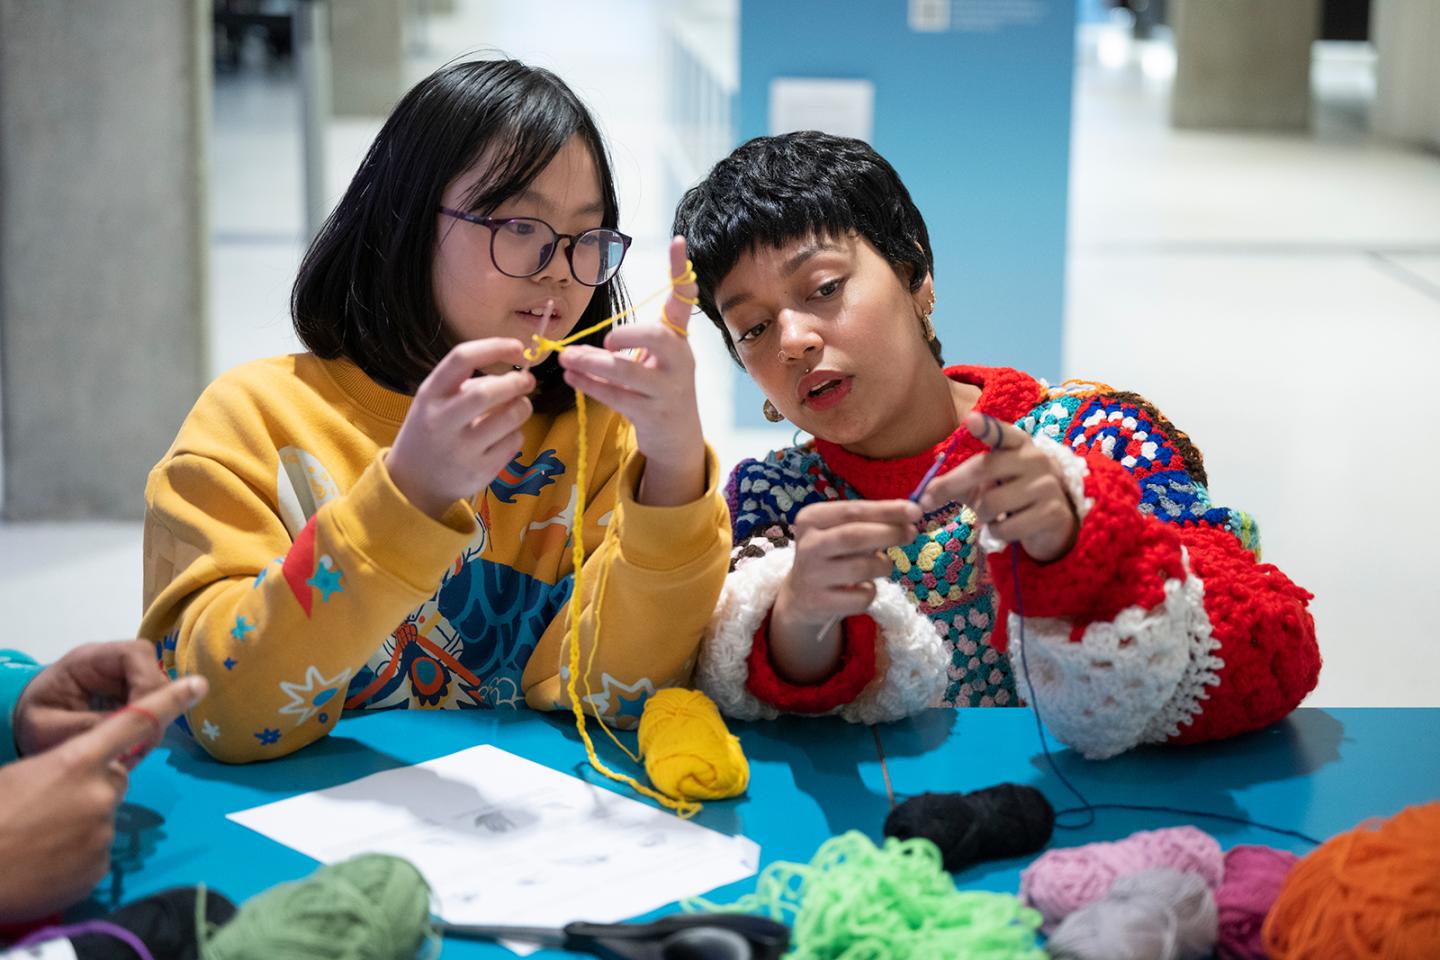 Two people work on a craft activity using woolen thread